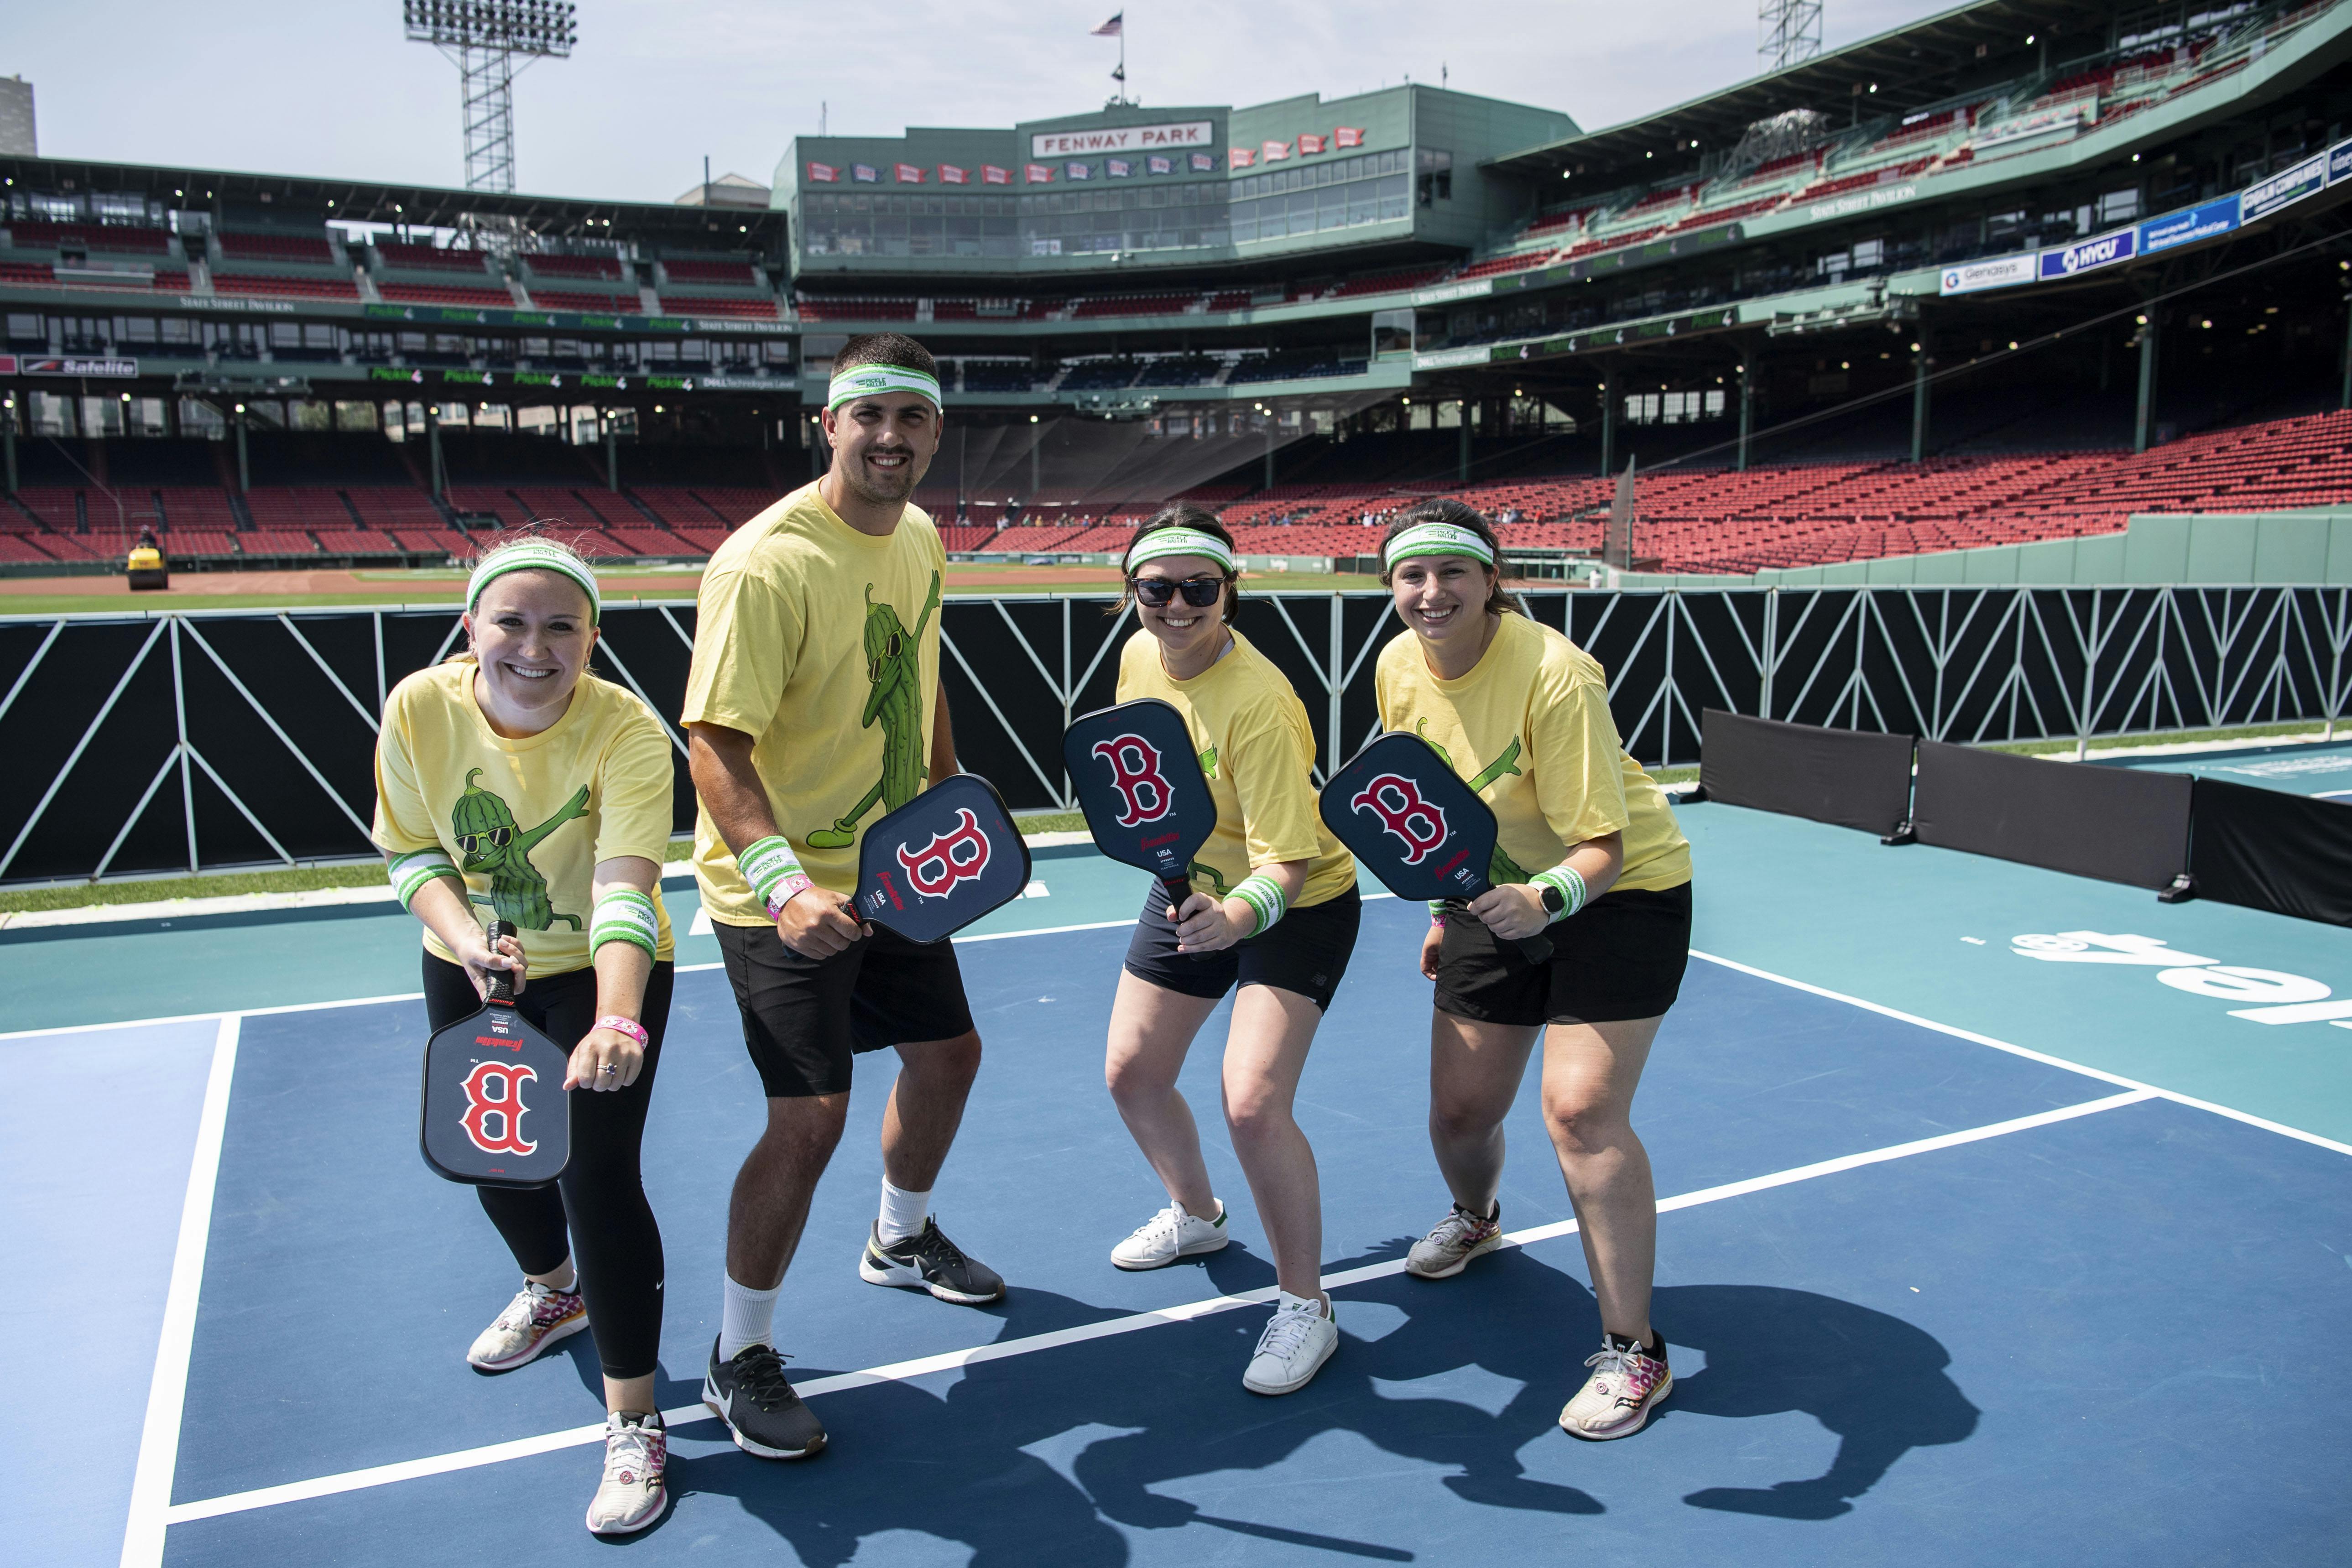 GAMIFICATION OF PICKLEBALL PRACTICE